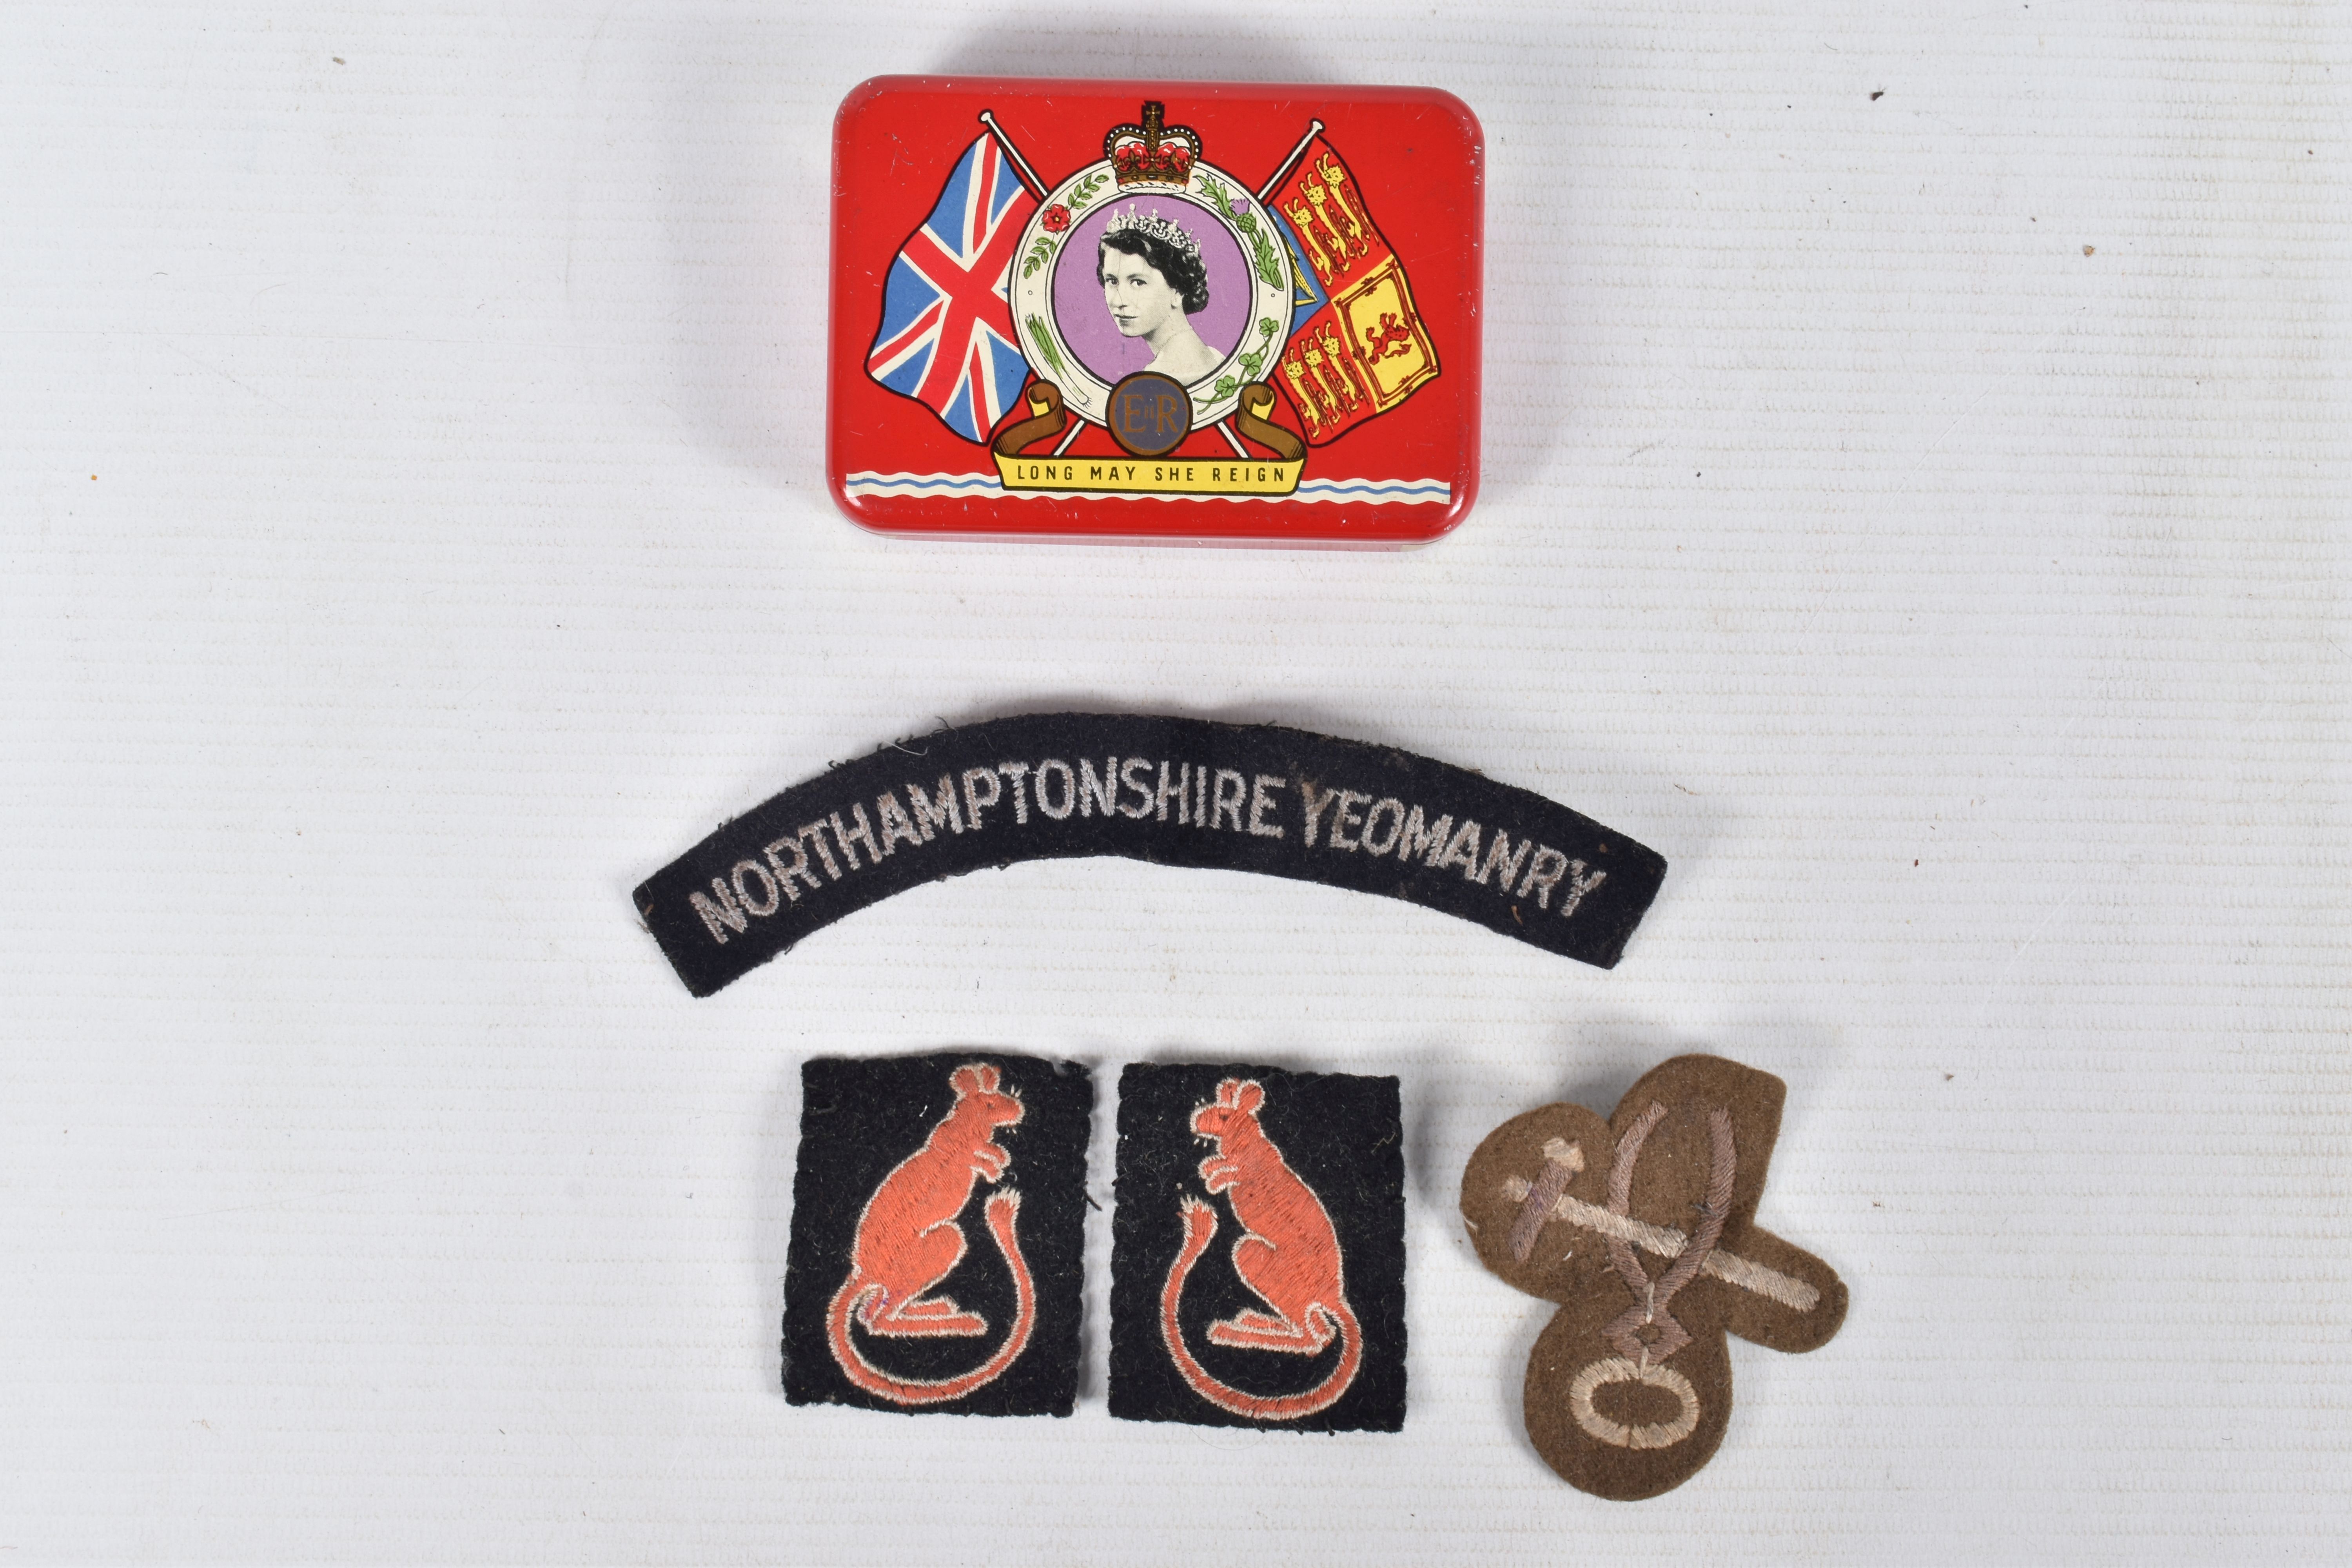 A WOODEN BOX CONTAINING TWO SETS OF WWII MEDALS, cap badges, formation patches and other military - Image 10 of 22